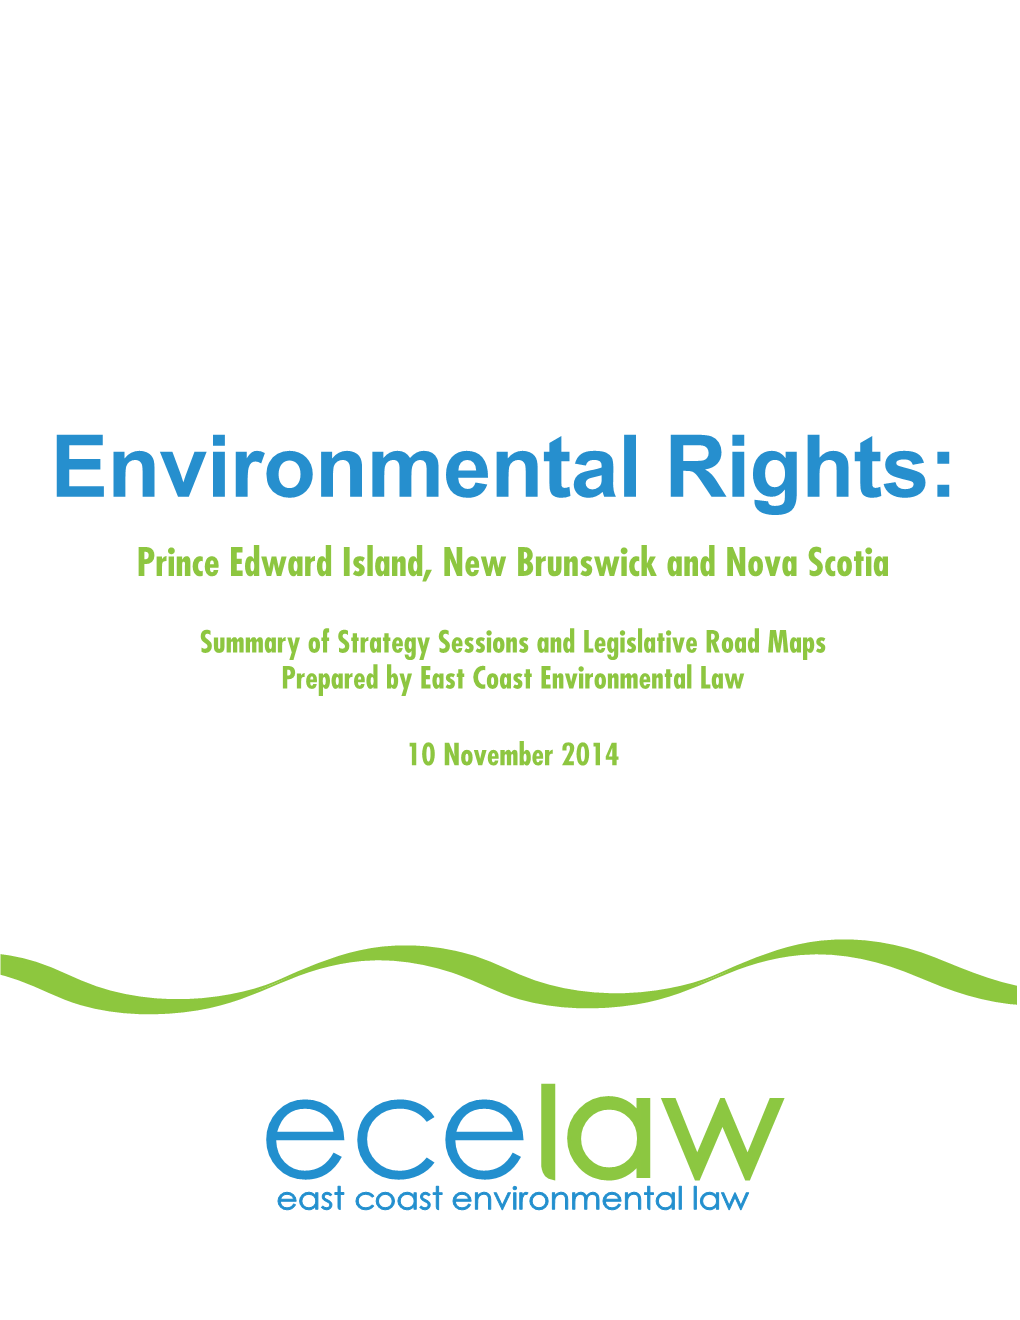 Environmental Rights Strategy Sessions Report